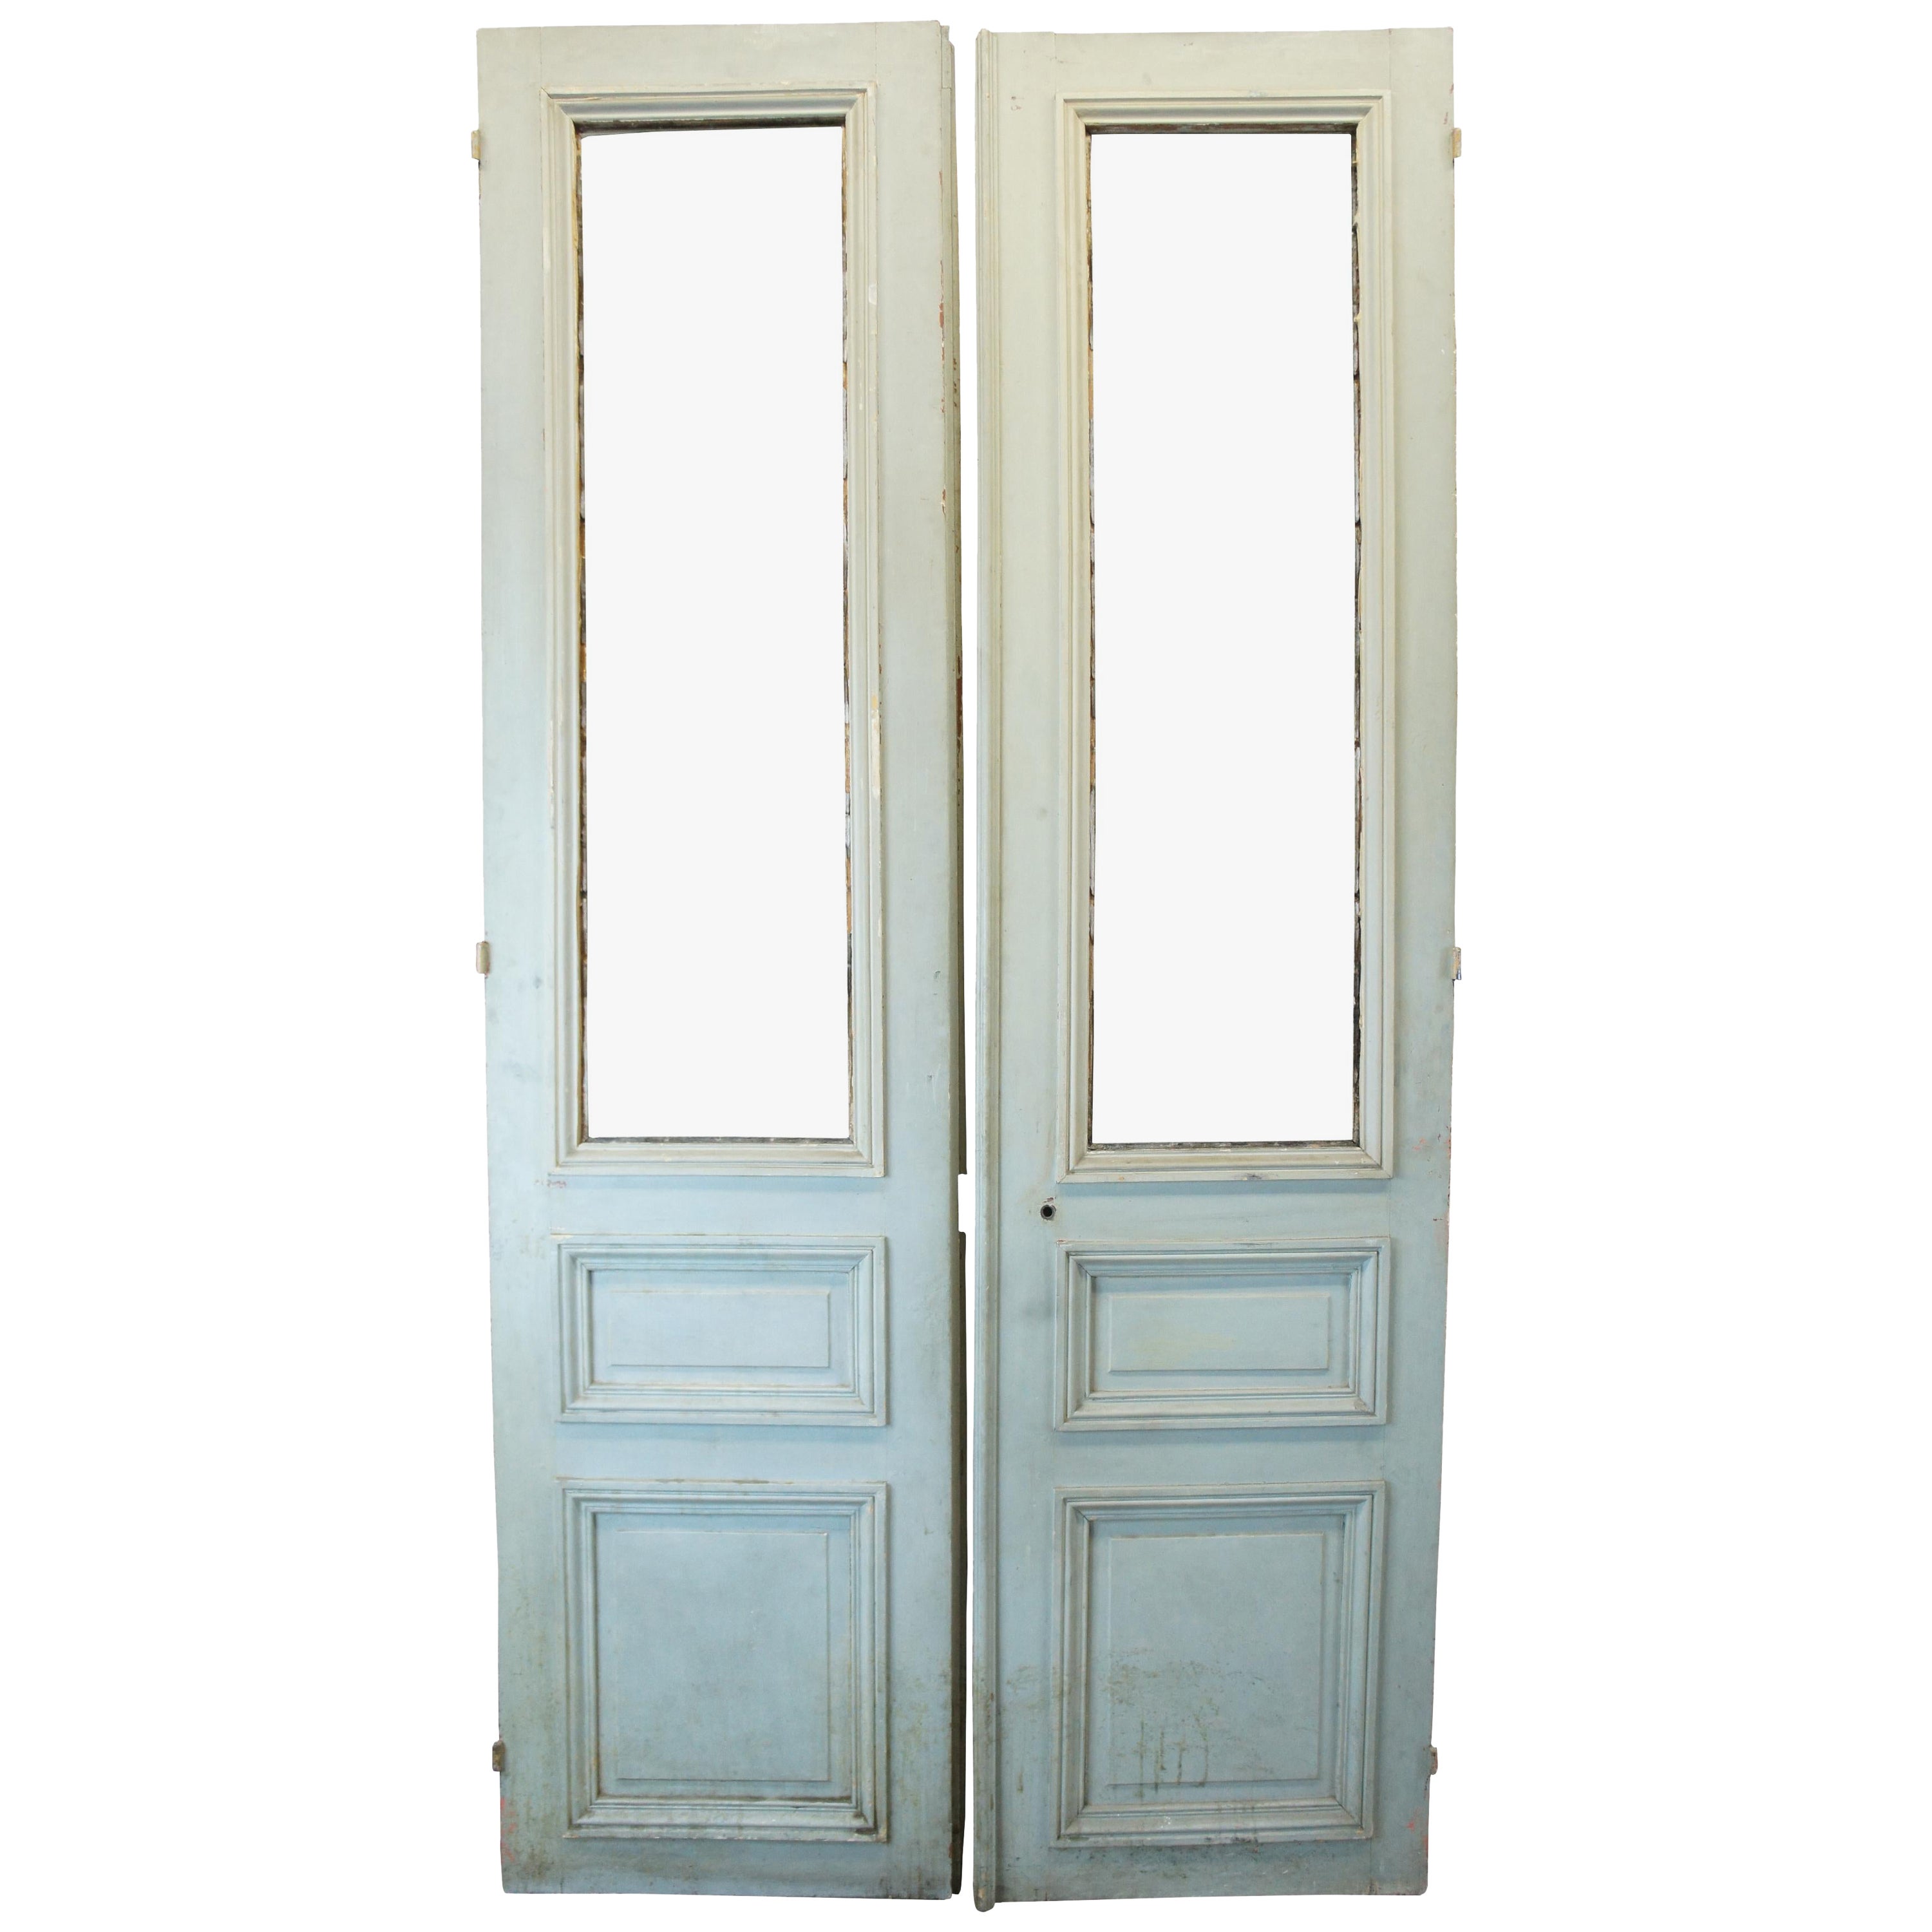 Monumental Antique Victorian Tall Paneled French Double Doors Architectural